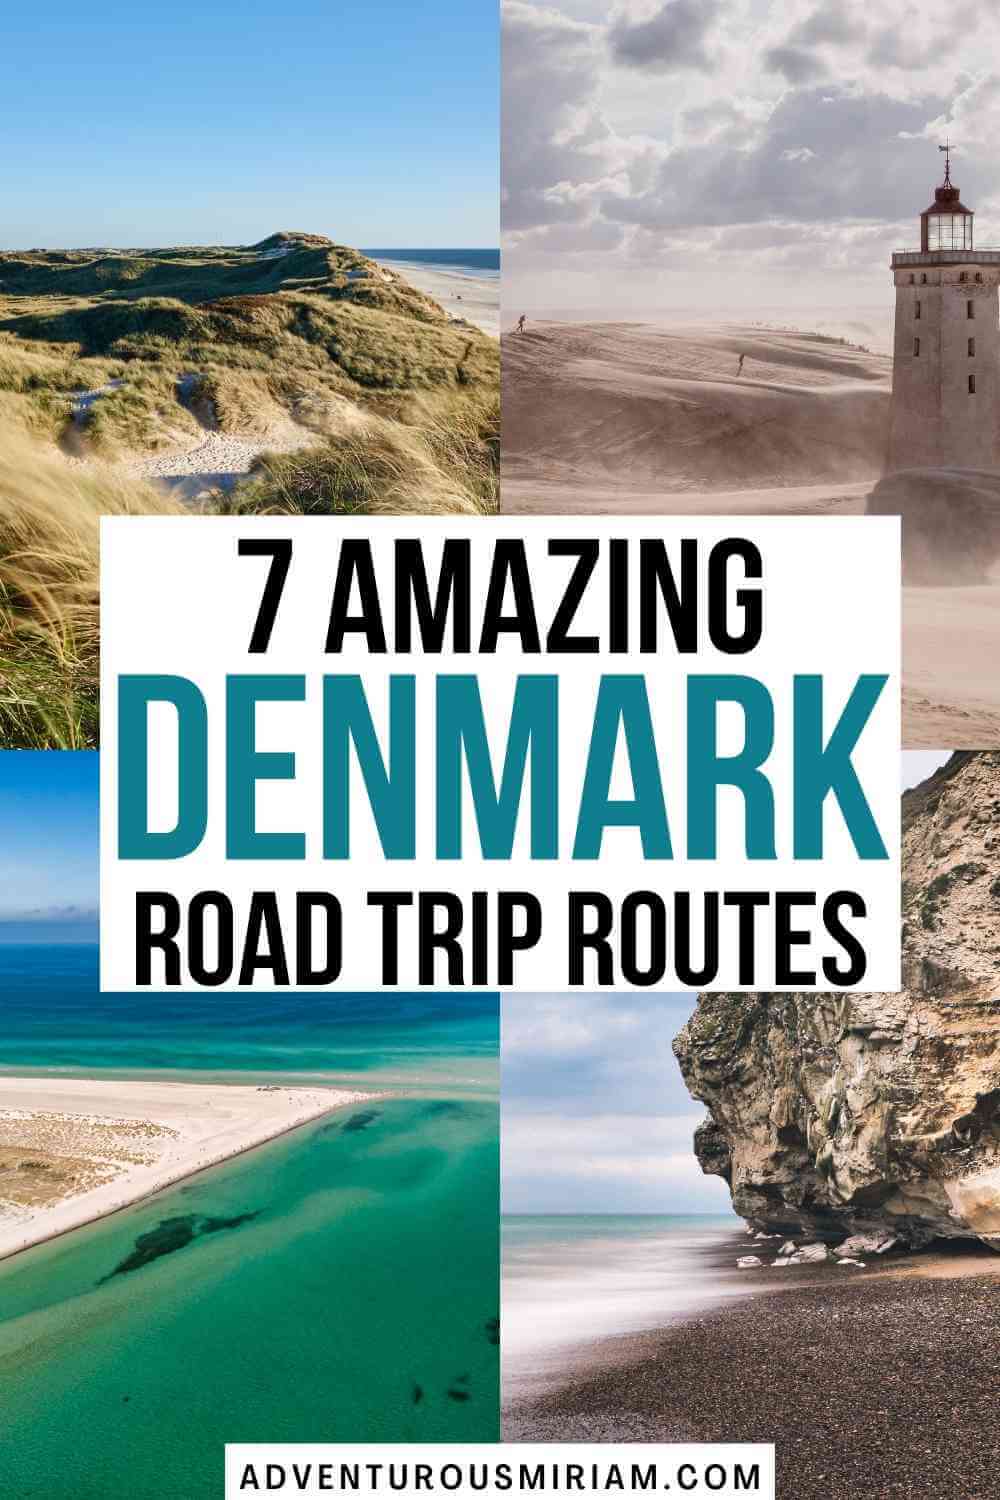 Most visitors that come to Denmark only visit Copenhagen, and that’s a shame because there are SO many beautiful places here. Like Funen, which is the most romantic mini destination you’ve never heard of, or North Jutland which is blessed with enchanted forests and a watery and rugged beauty. Here’s a list of the best summer road trips in Denmark.